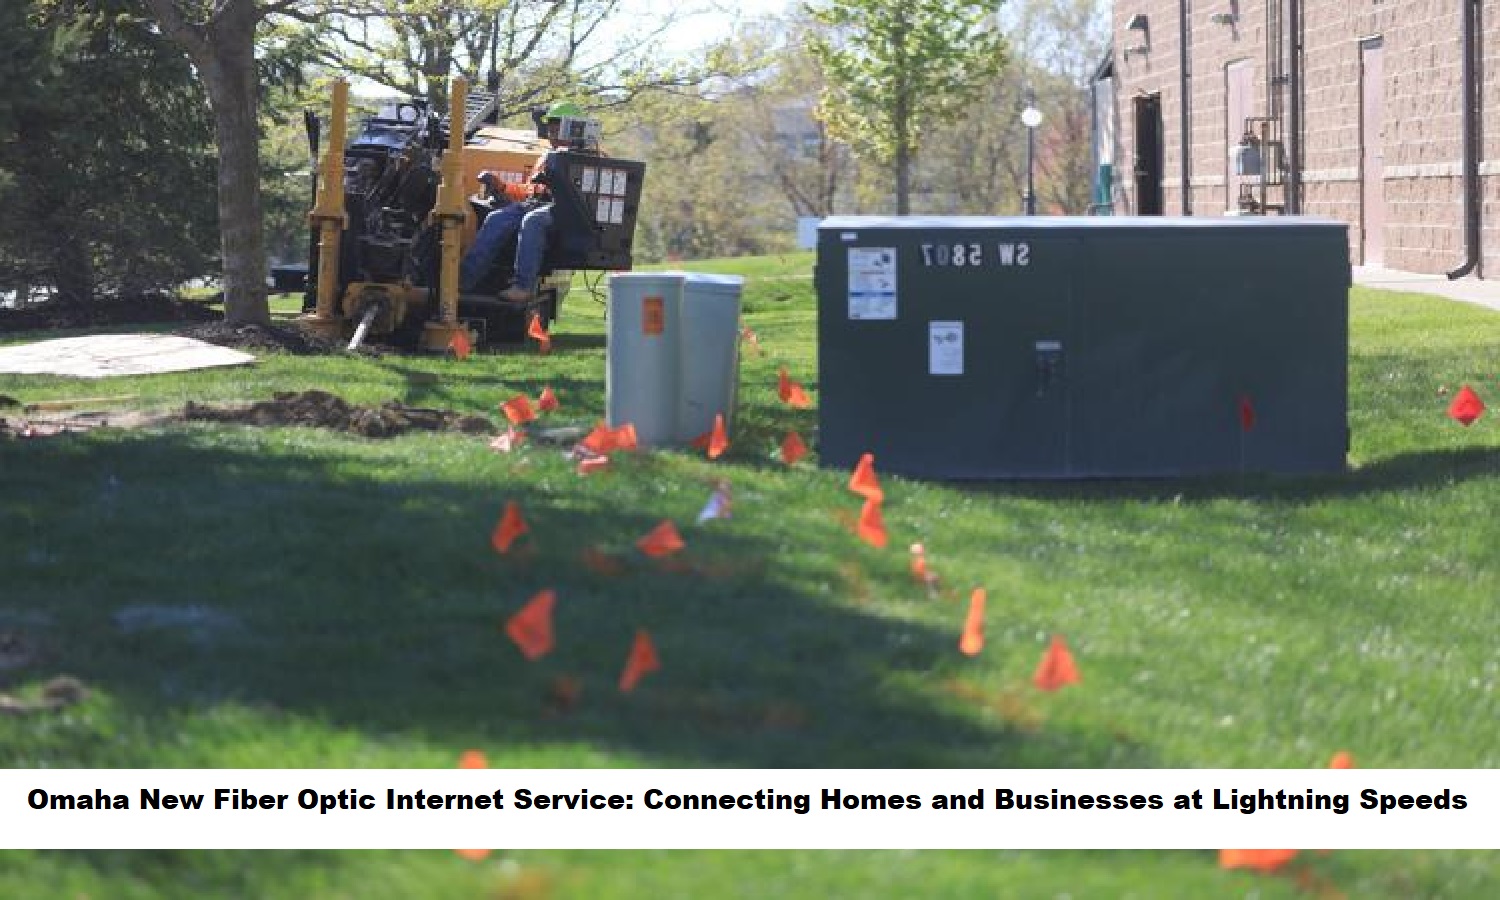 Omaha New Fiber Optic Internet Service: Connecting Homes and Businesses at Lightning Speeds